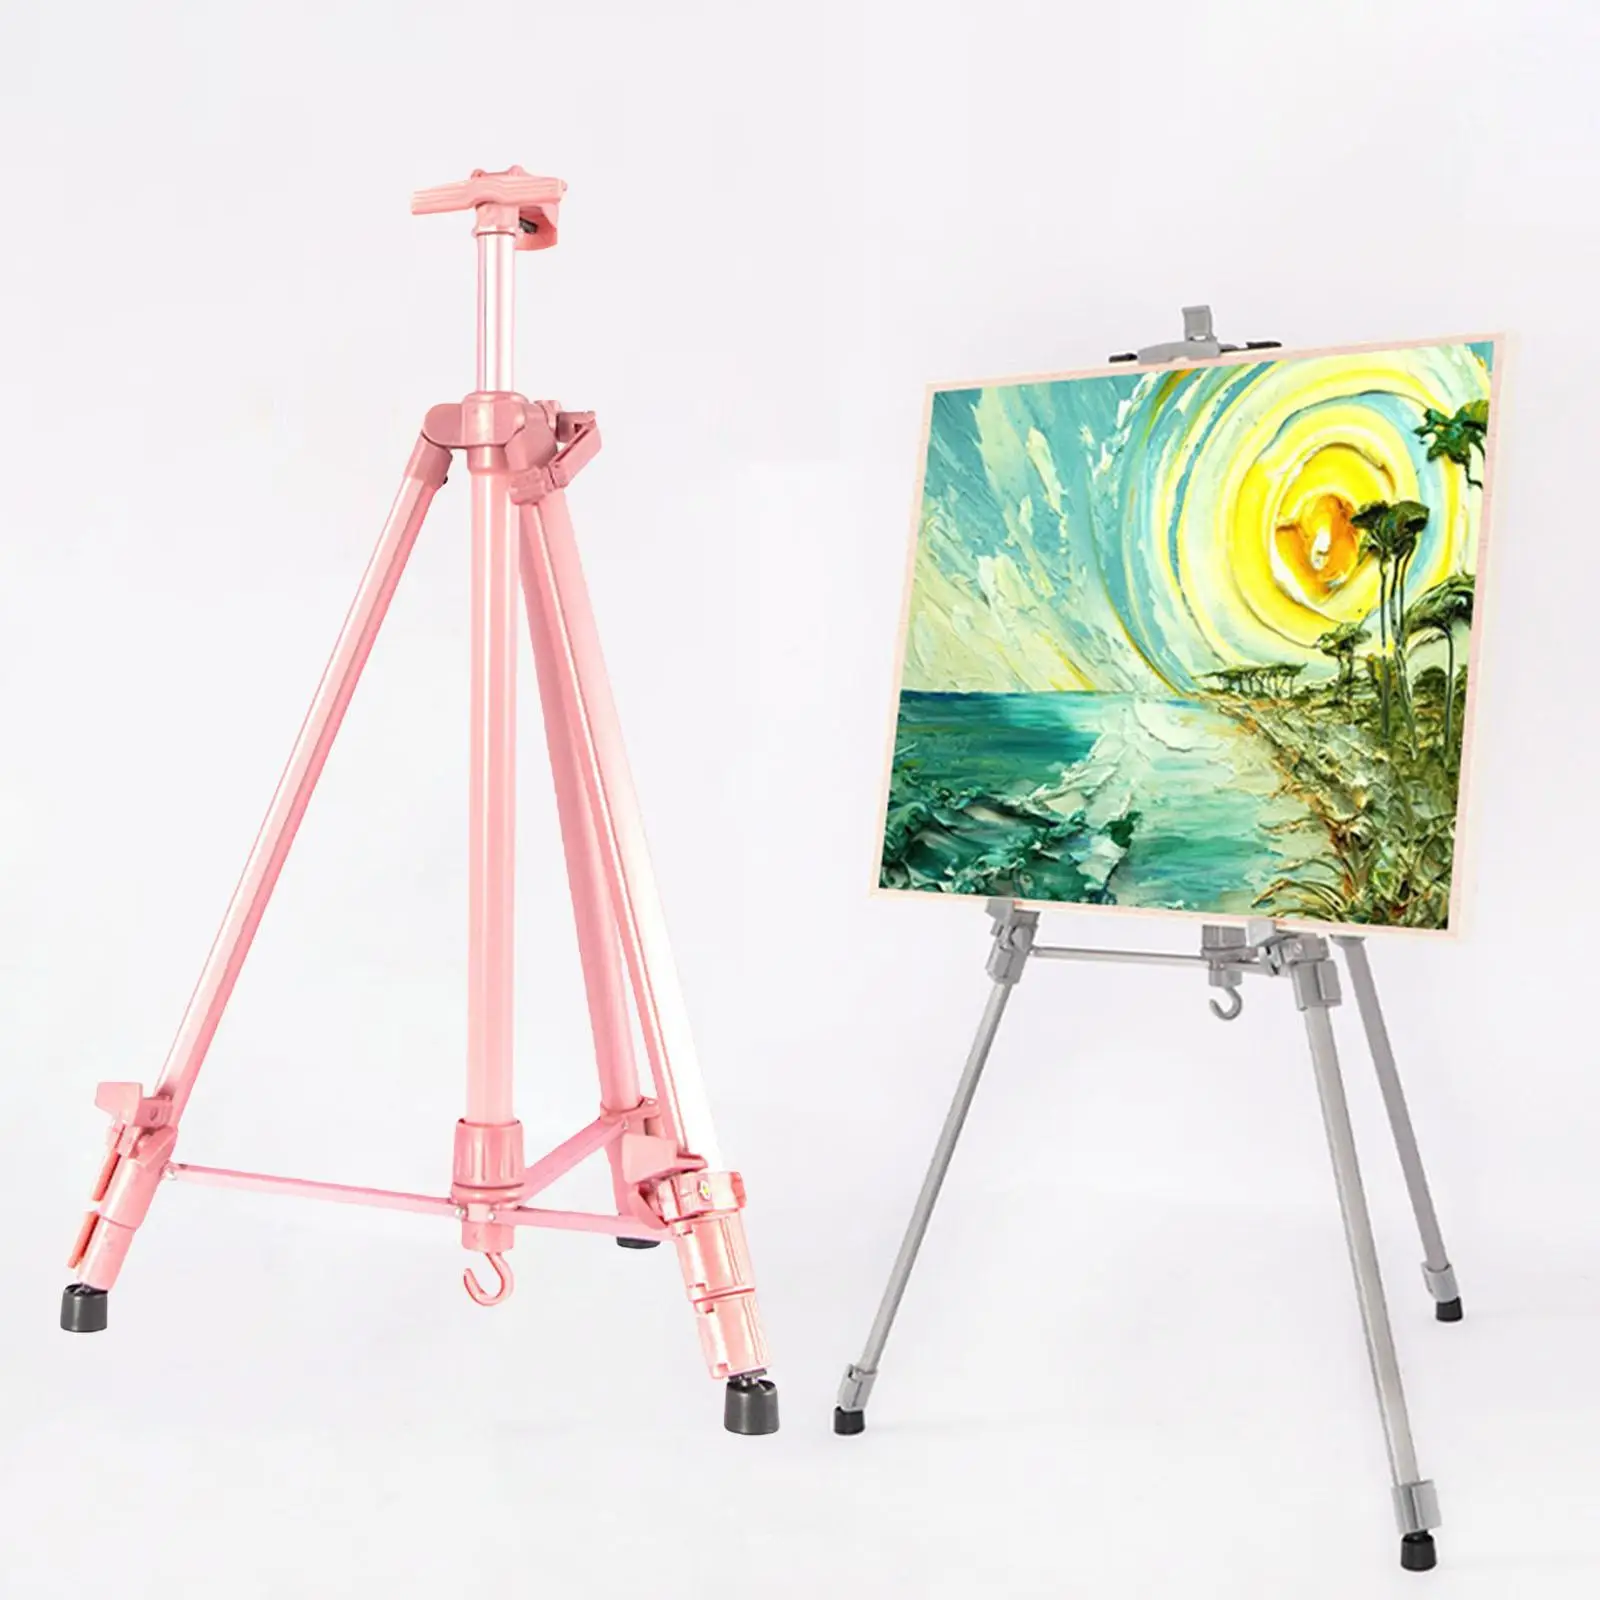 Adjustable Height Painting Easel Drawing Board Sketch Art Artist Tripod Display Stand for Displaying Painting Floor Tabletop